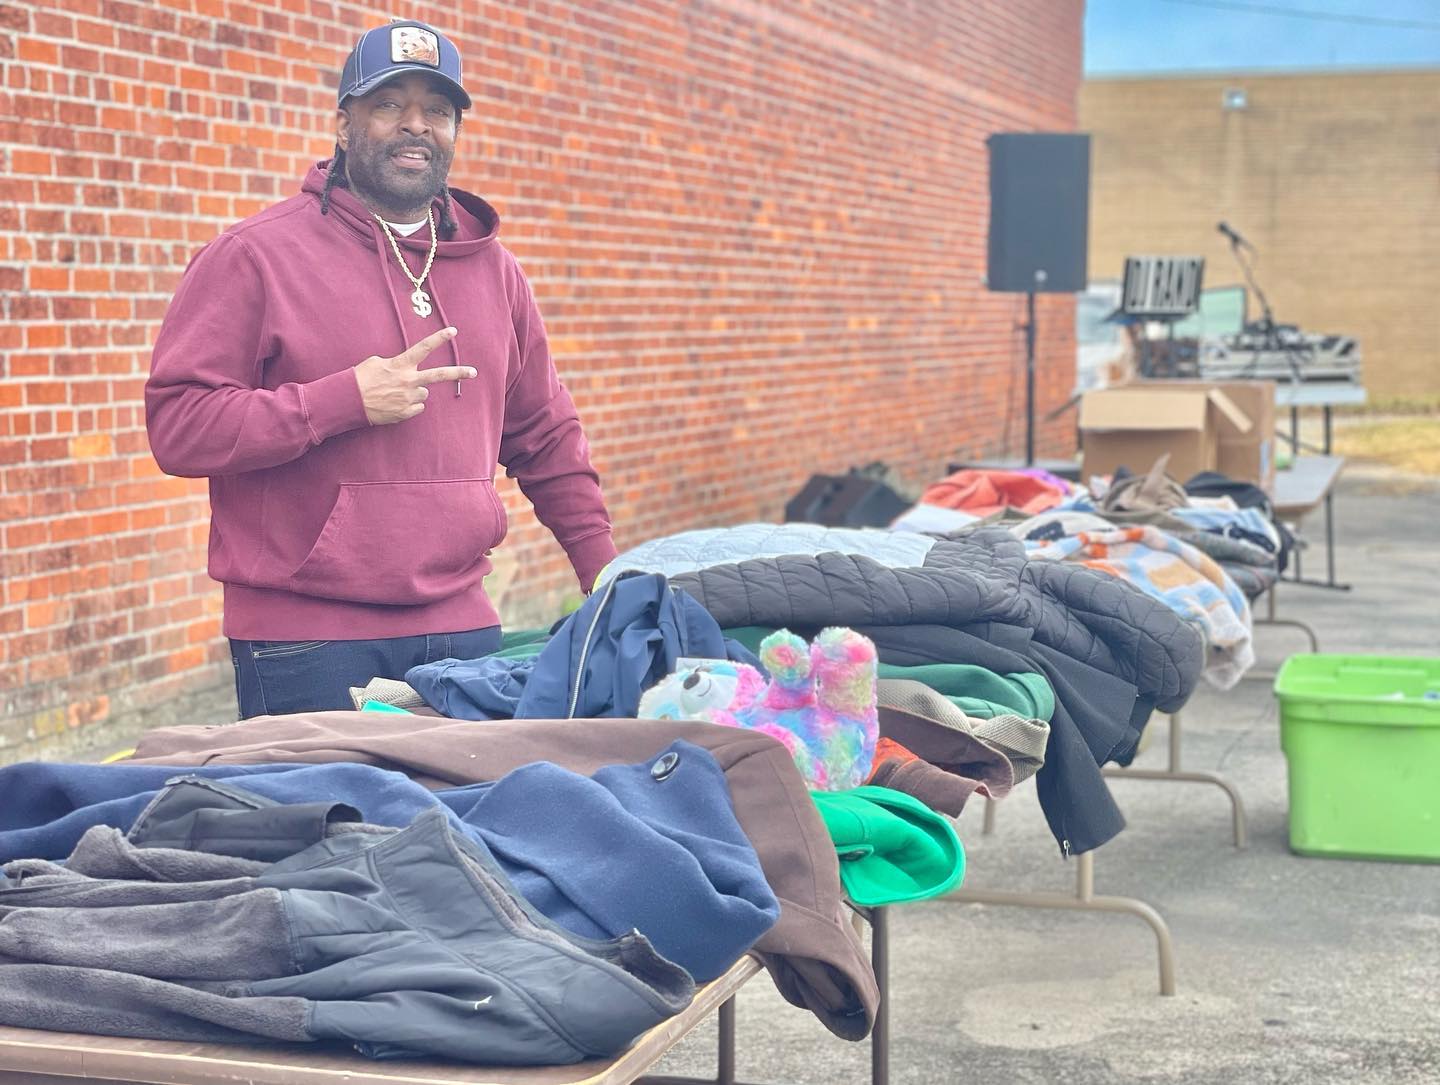 101.9 Kiss FM’s SkeeMonee does it BIG for his Kinston community with Holiday Coat Drive